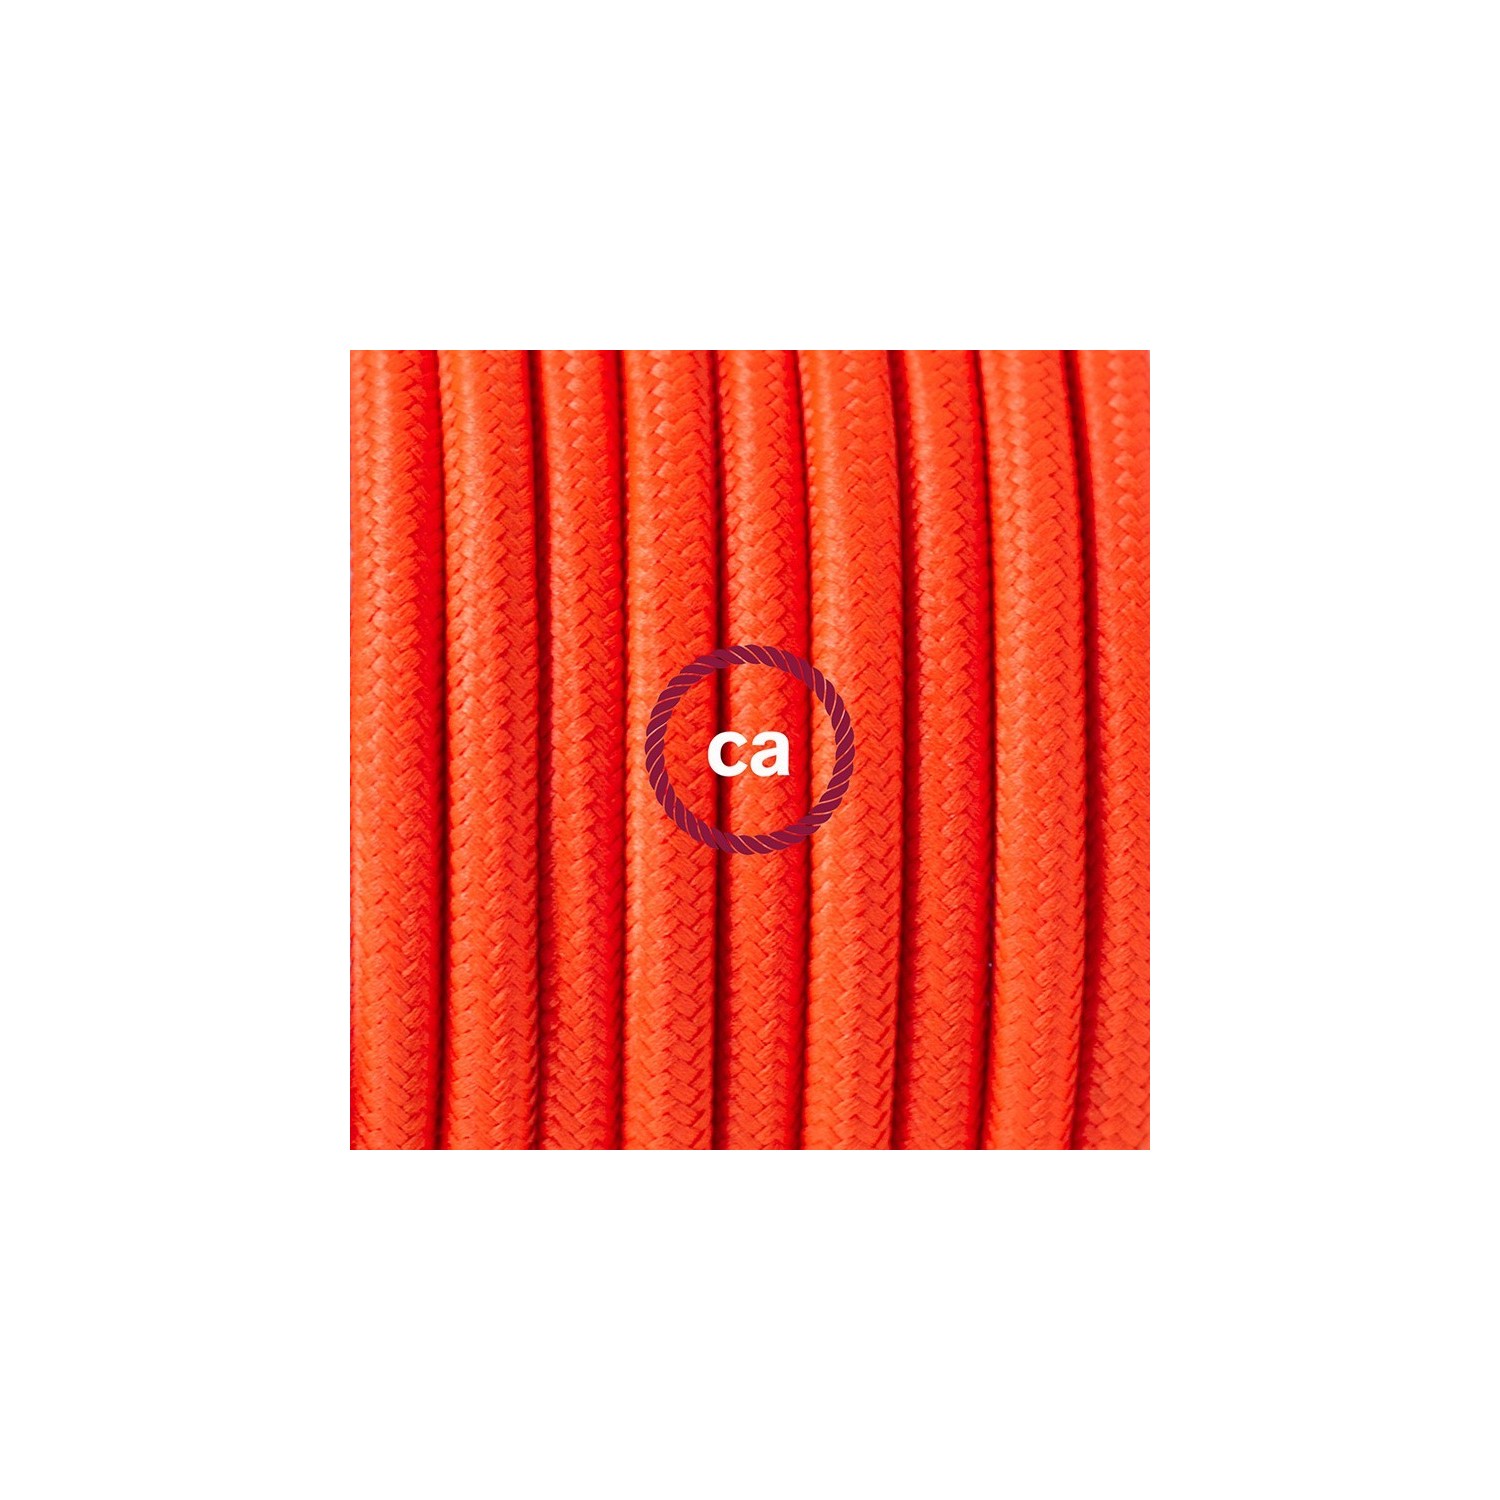 Create your RF15 Orange Fluo Snake for lampshade and bring the light wherever you want.